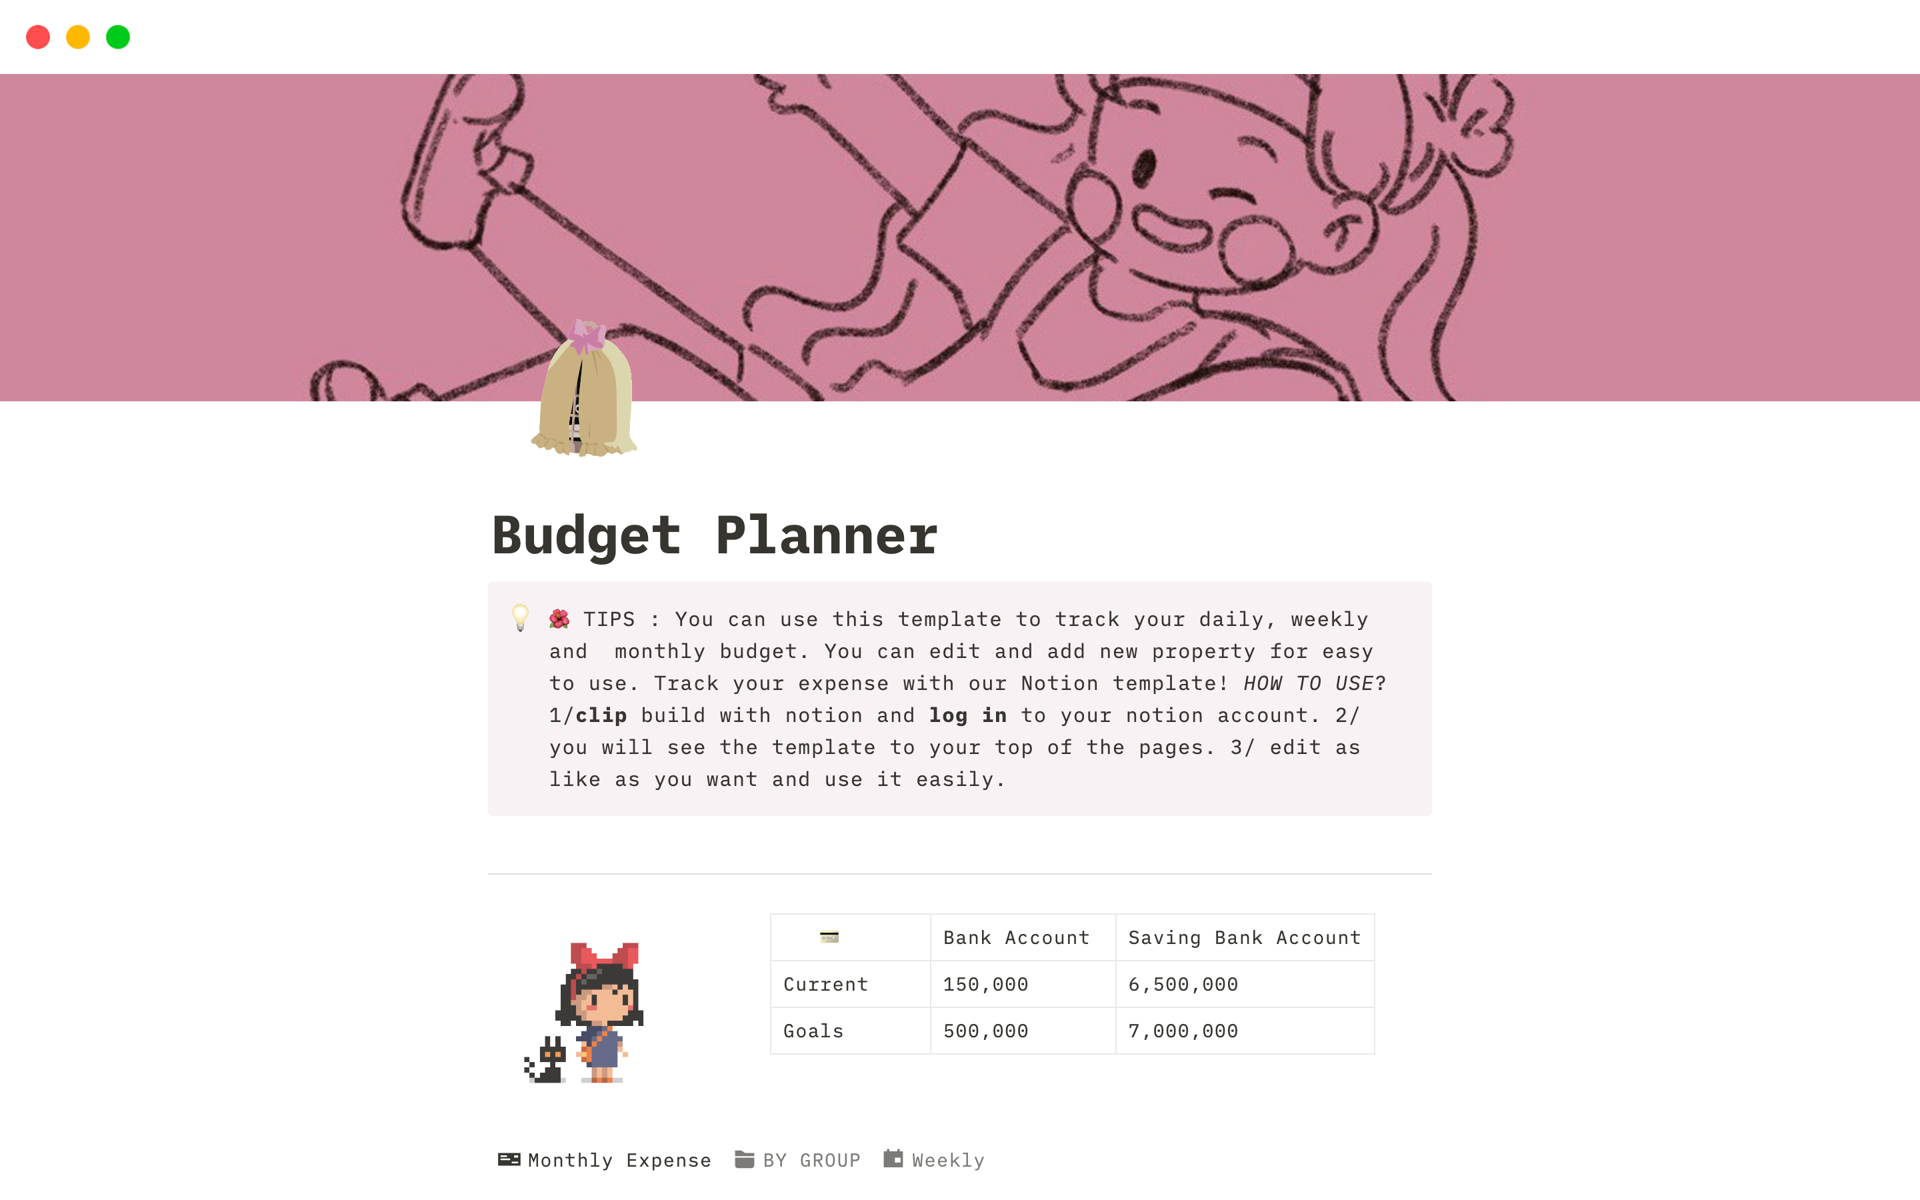 Budget Planner with cute interface design! 